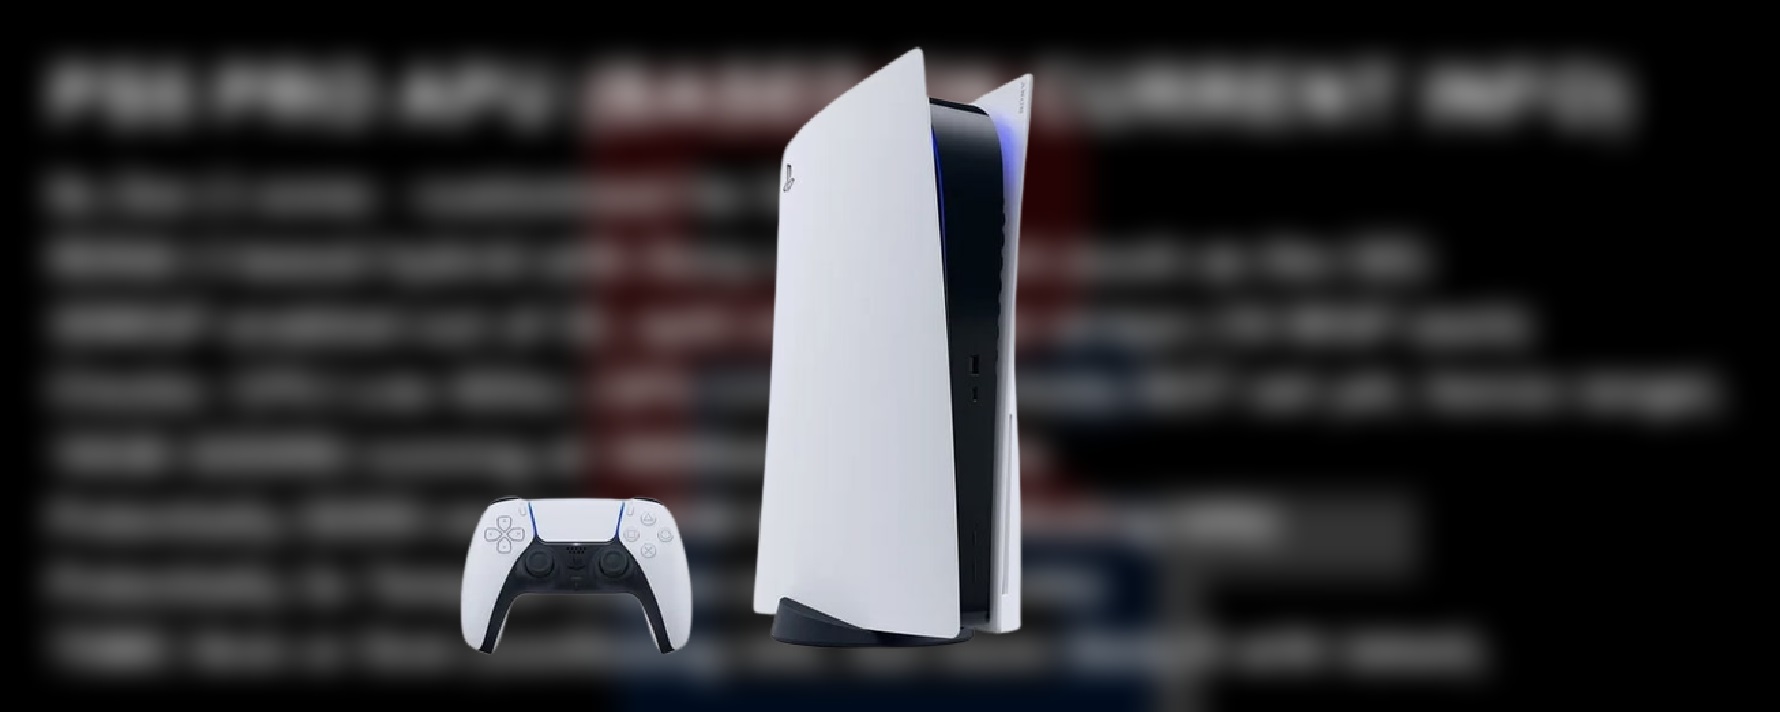 PlayStation 5 release date and price announced at PS5 Showcase